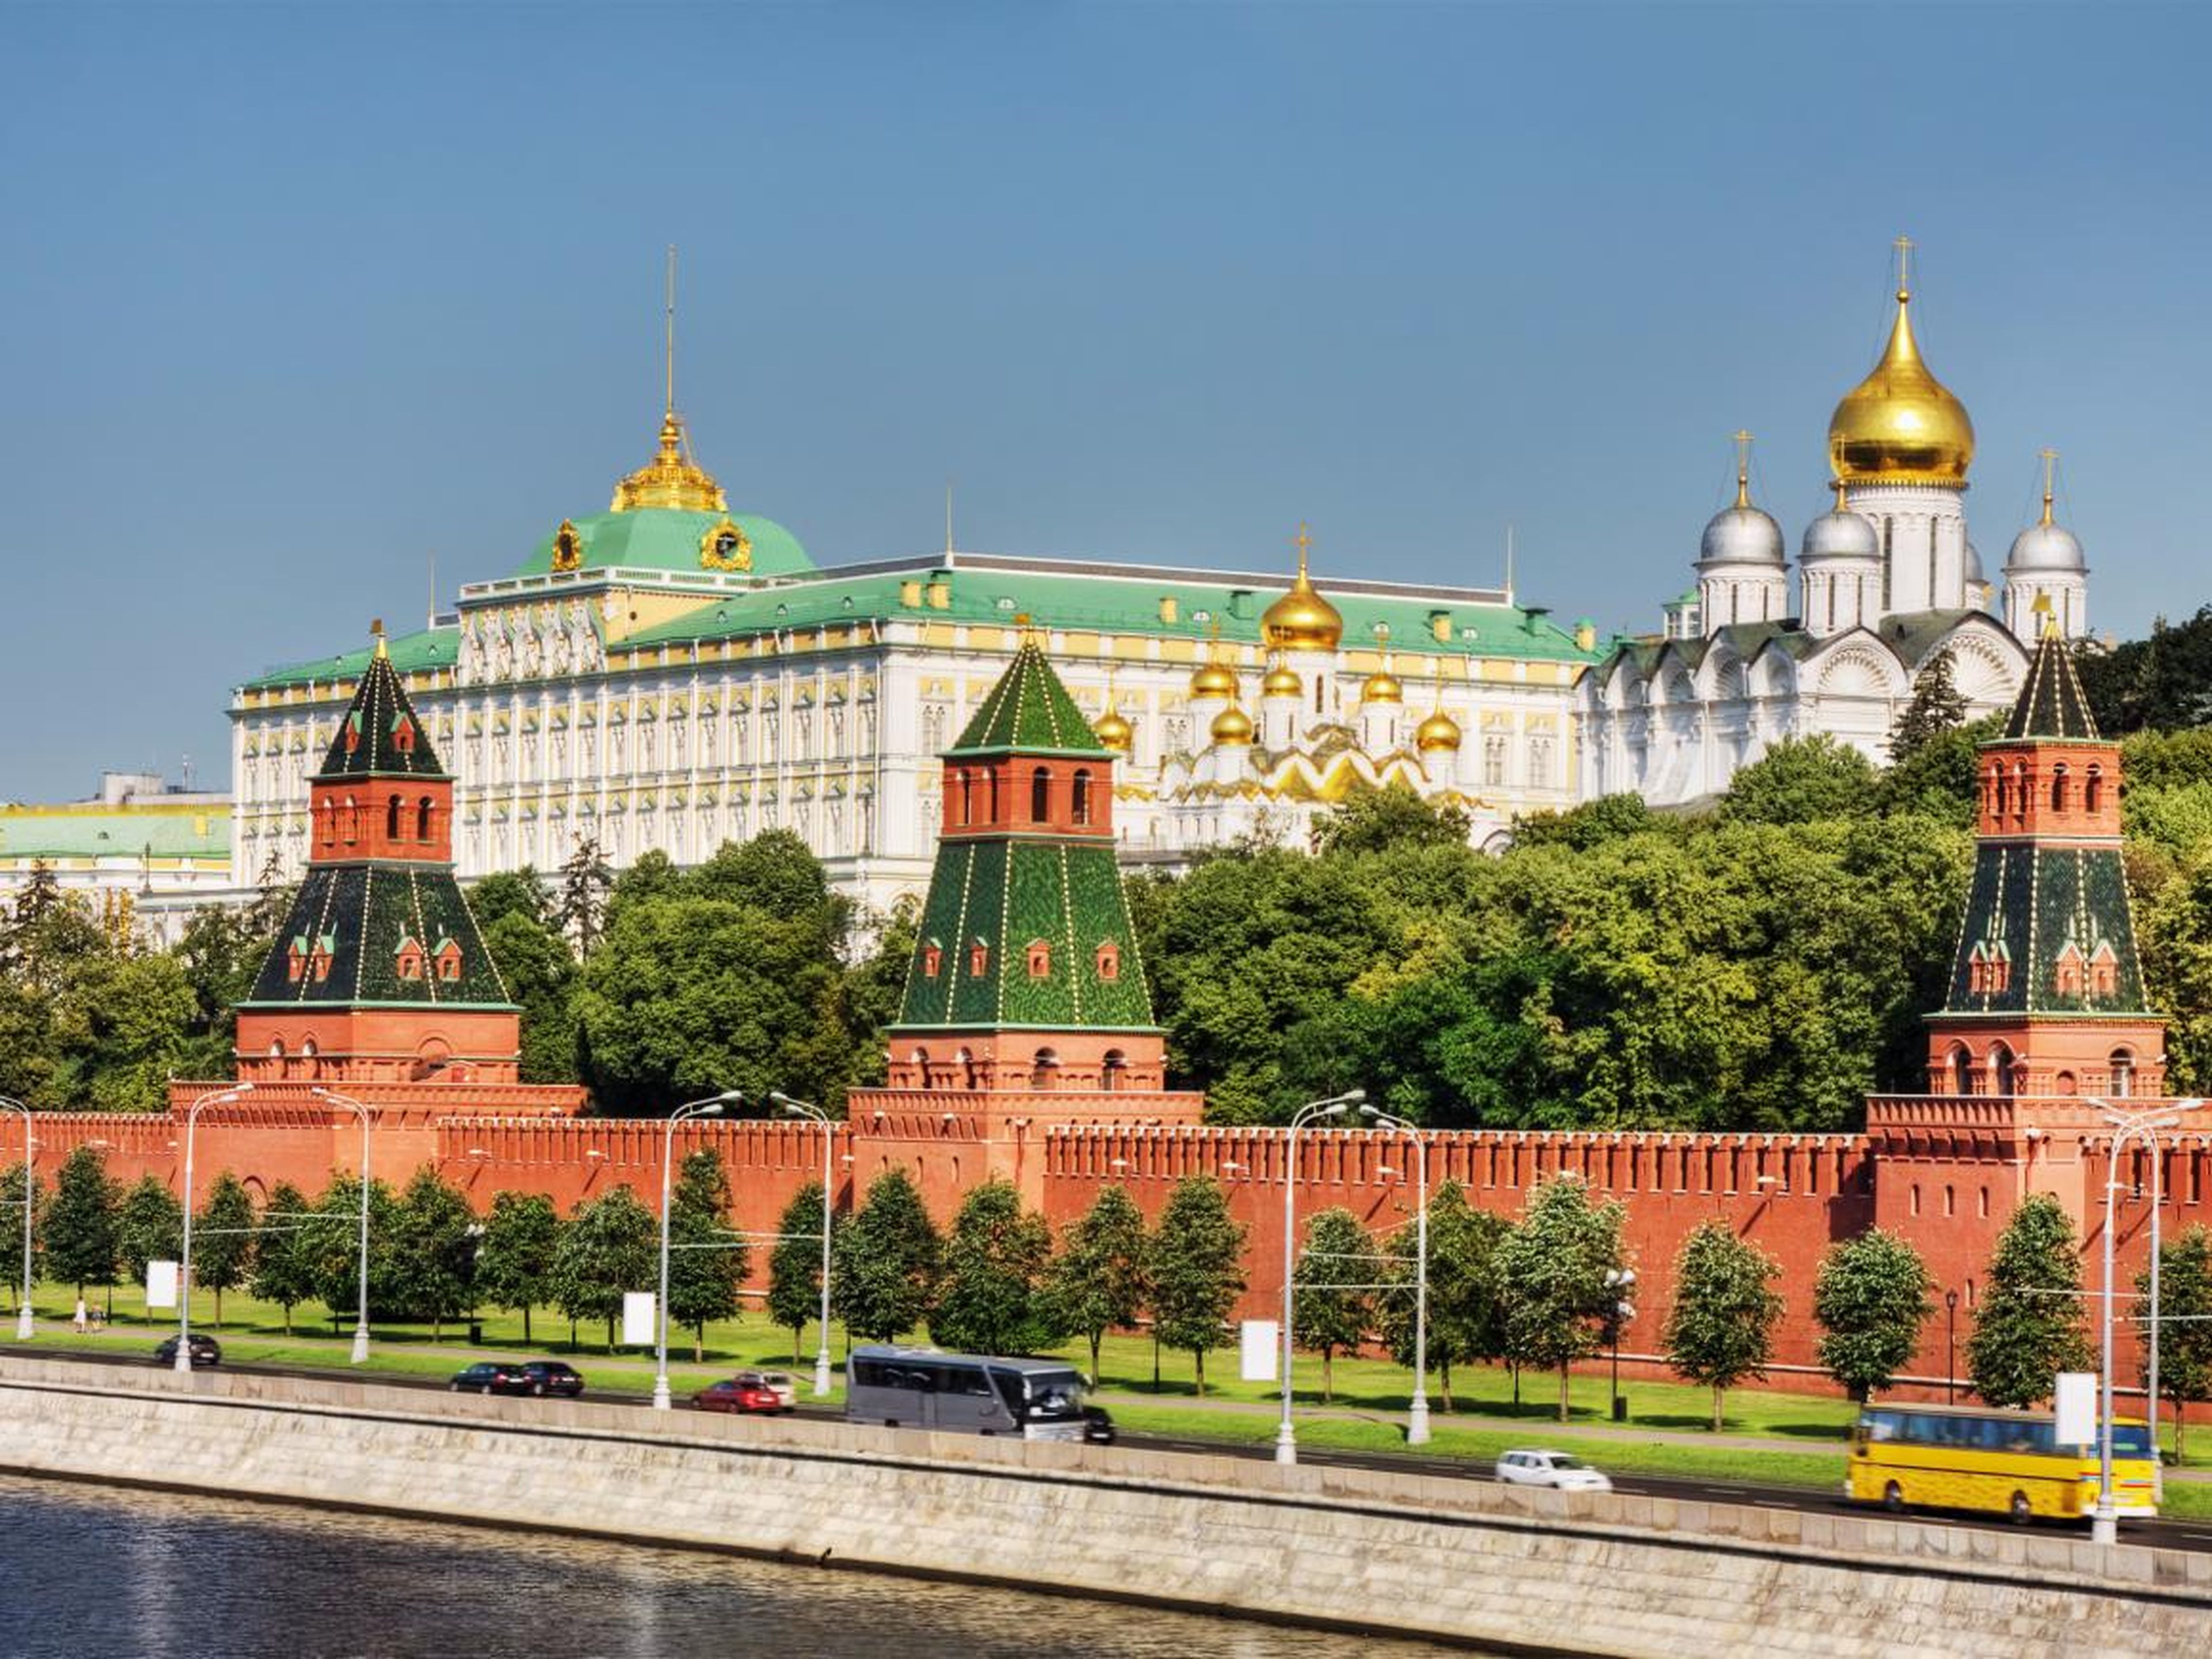 As president of Russia, Putin's official residence is the Moscow Kremlin. However, he spends most of his time at a suburban government residence outside of the city called Novo-Ogaryovo.